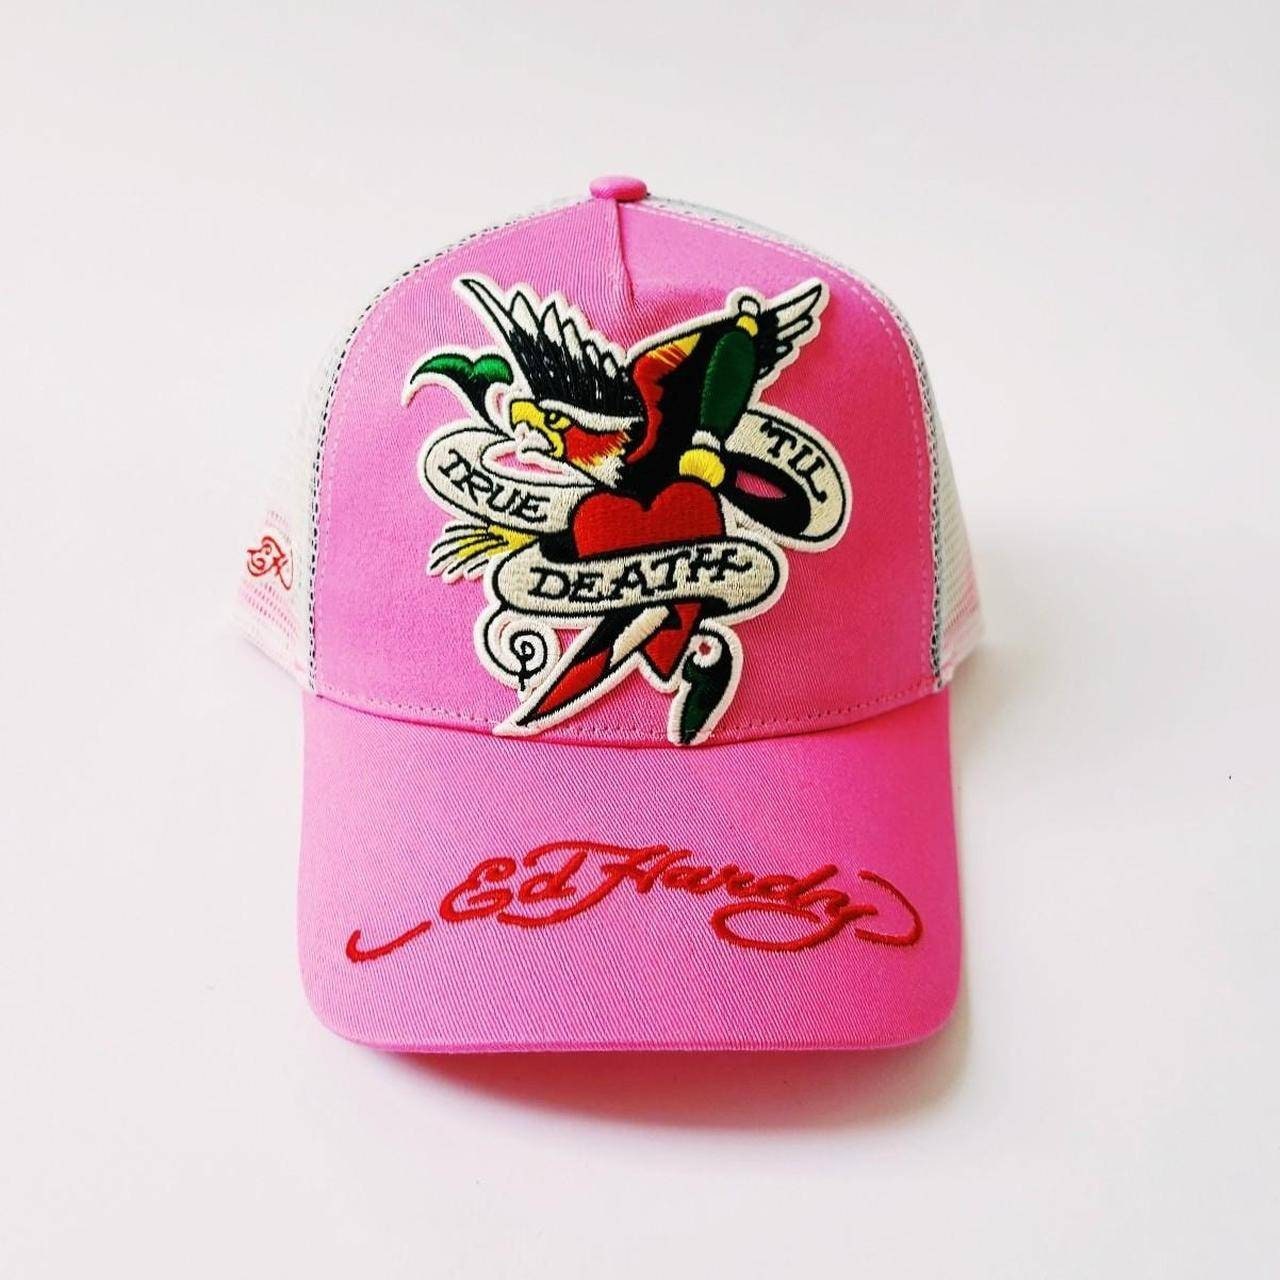 Vintage Pink Ed Hardy Cap / Ed Hardy Cap / Ed Hardy Trucker Cap. Ed Hardy  Pink Eagle Heart Dagger Print. Deadstock New With Tags -  Finland